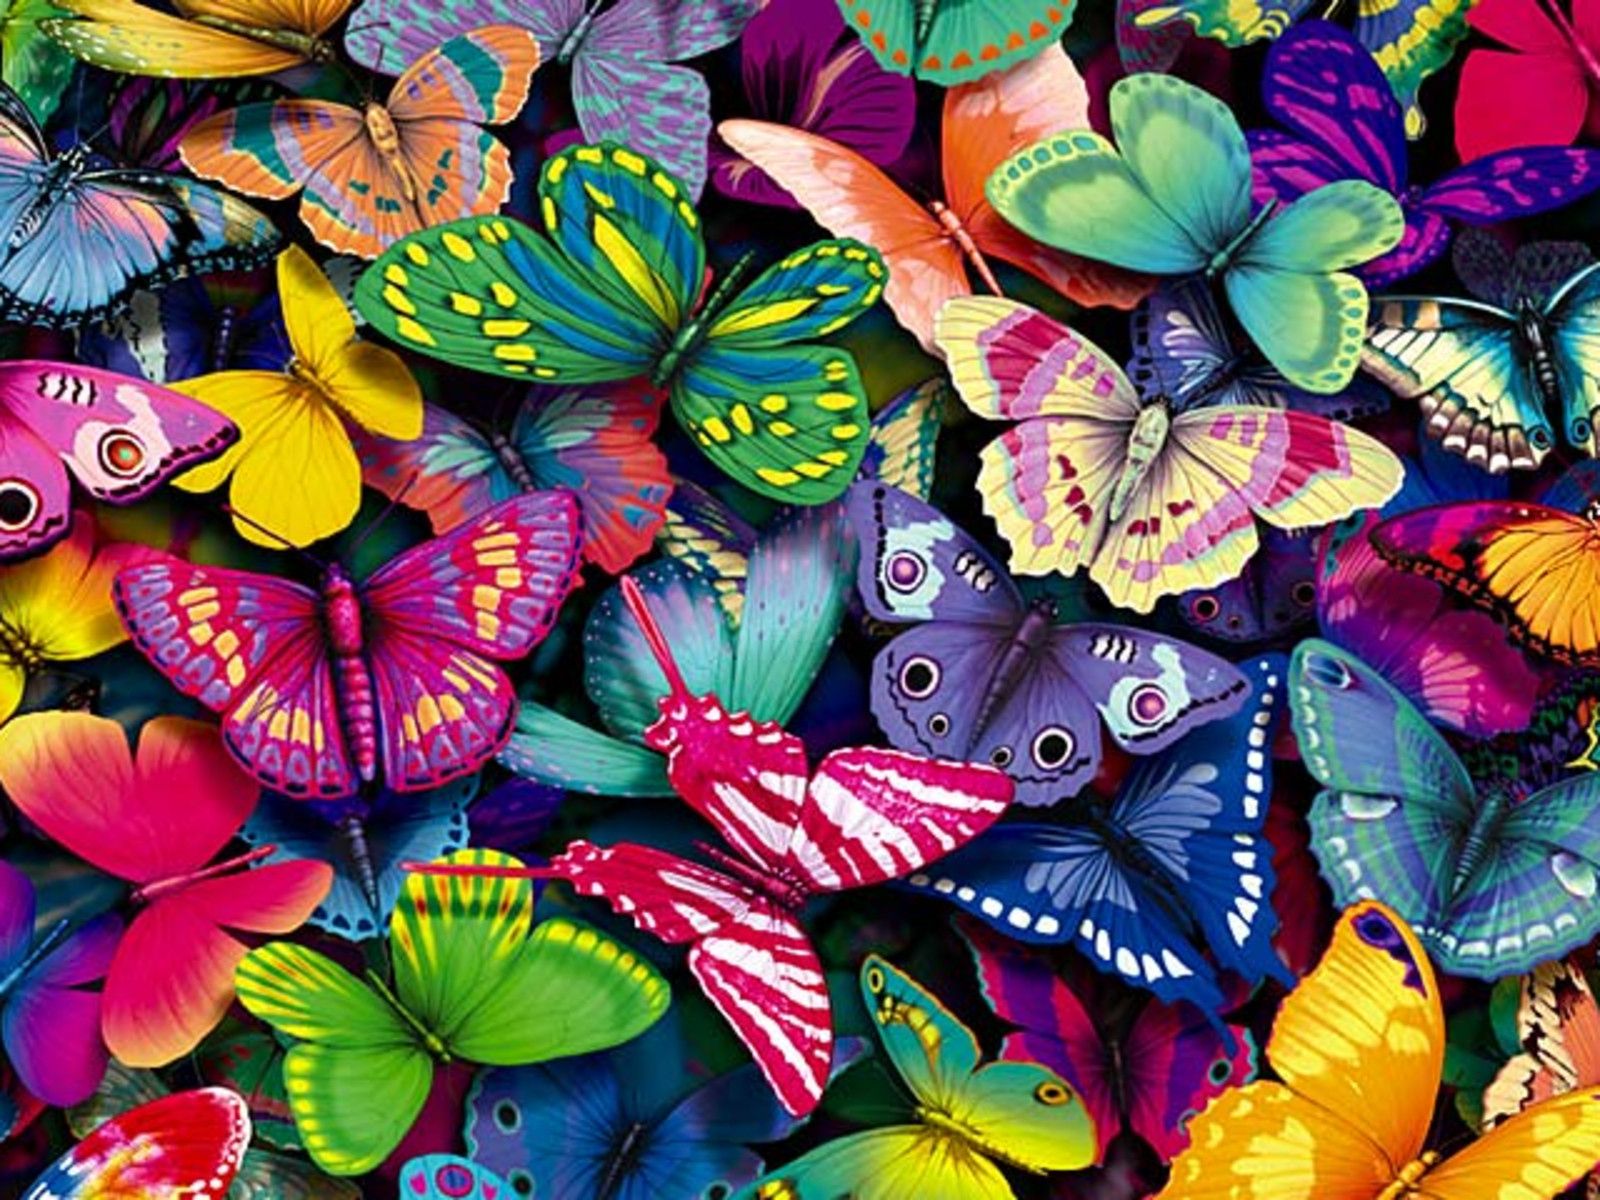 Lots of colorful butterflies